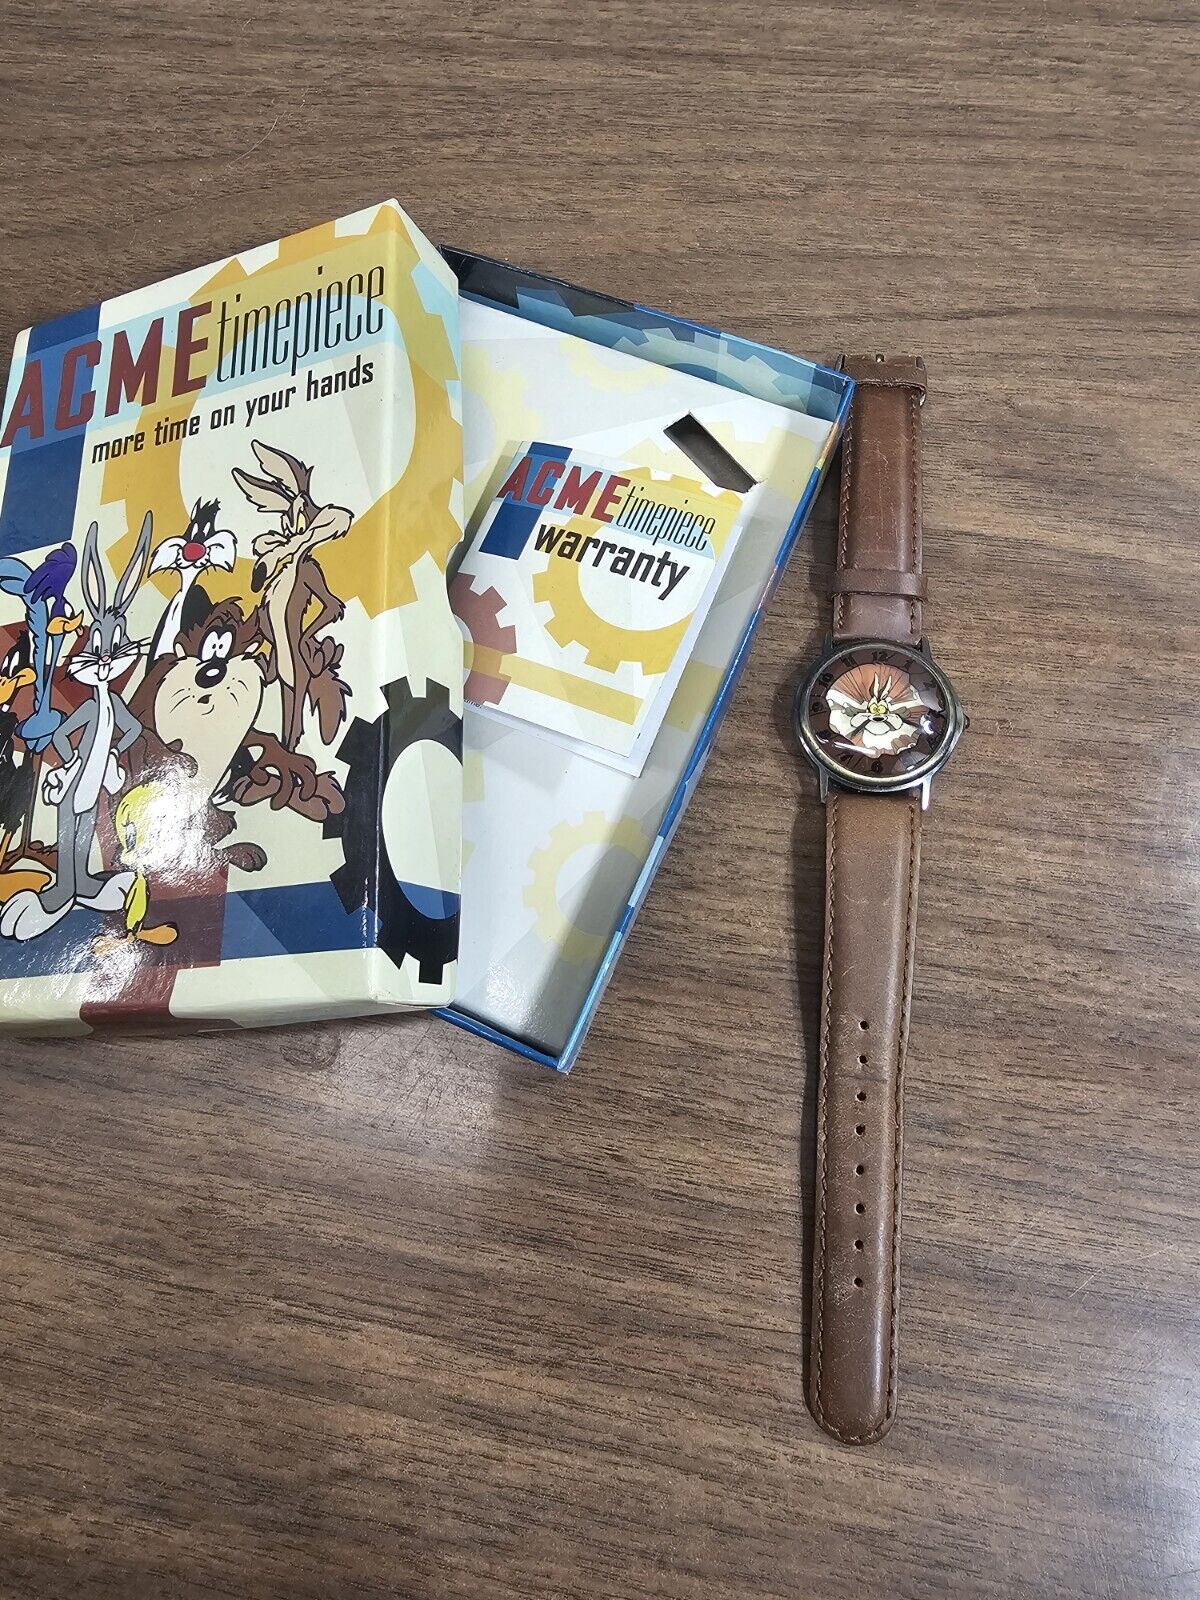 Vintage 1990s Warner Bros Wile E. Coyote Fossil Watch